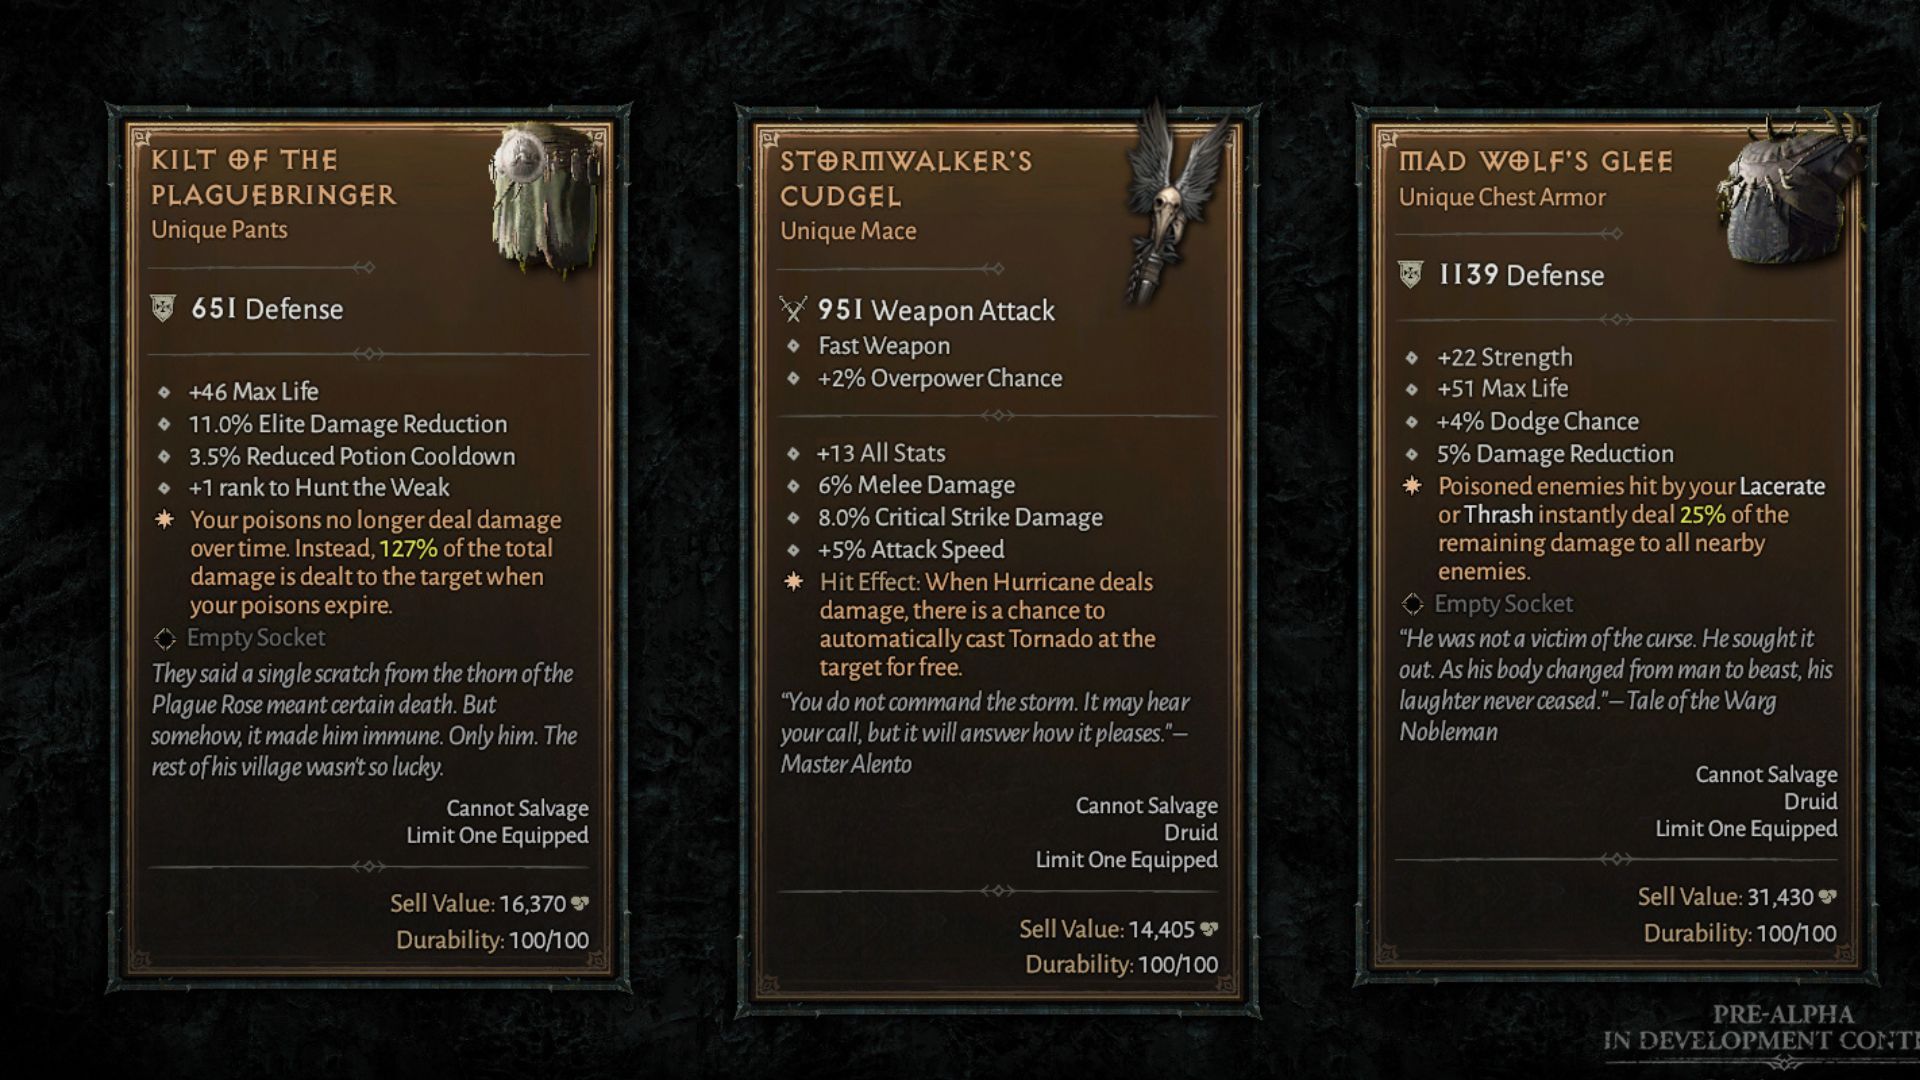 Diablo 4 uniques could include any class specific item